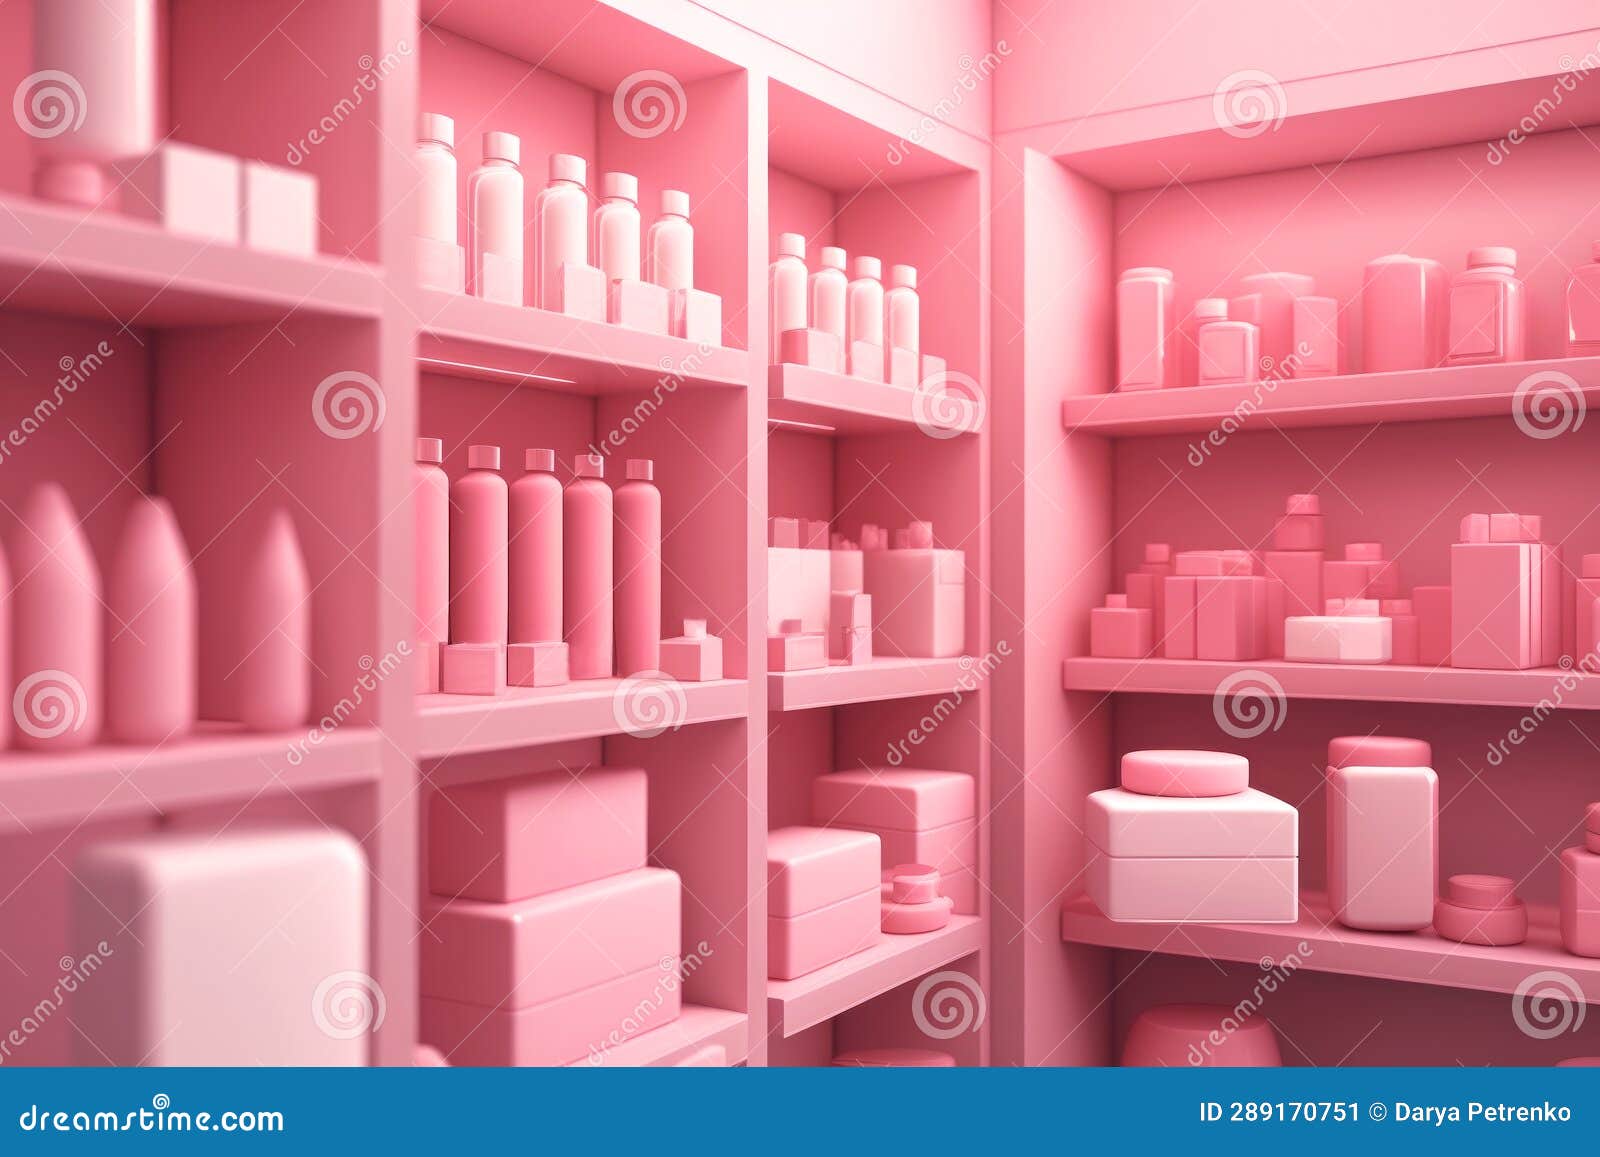 pink cabinet with shelves and varios mockups of beauty products without labels